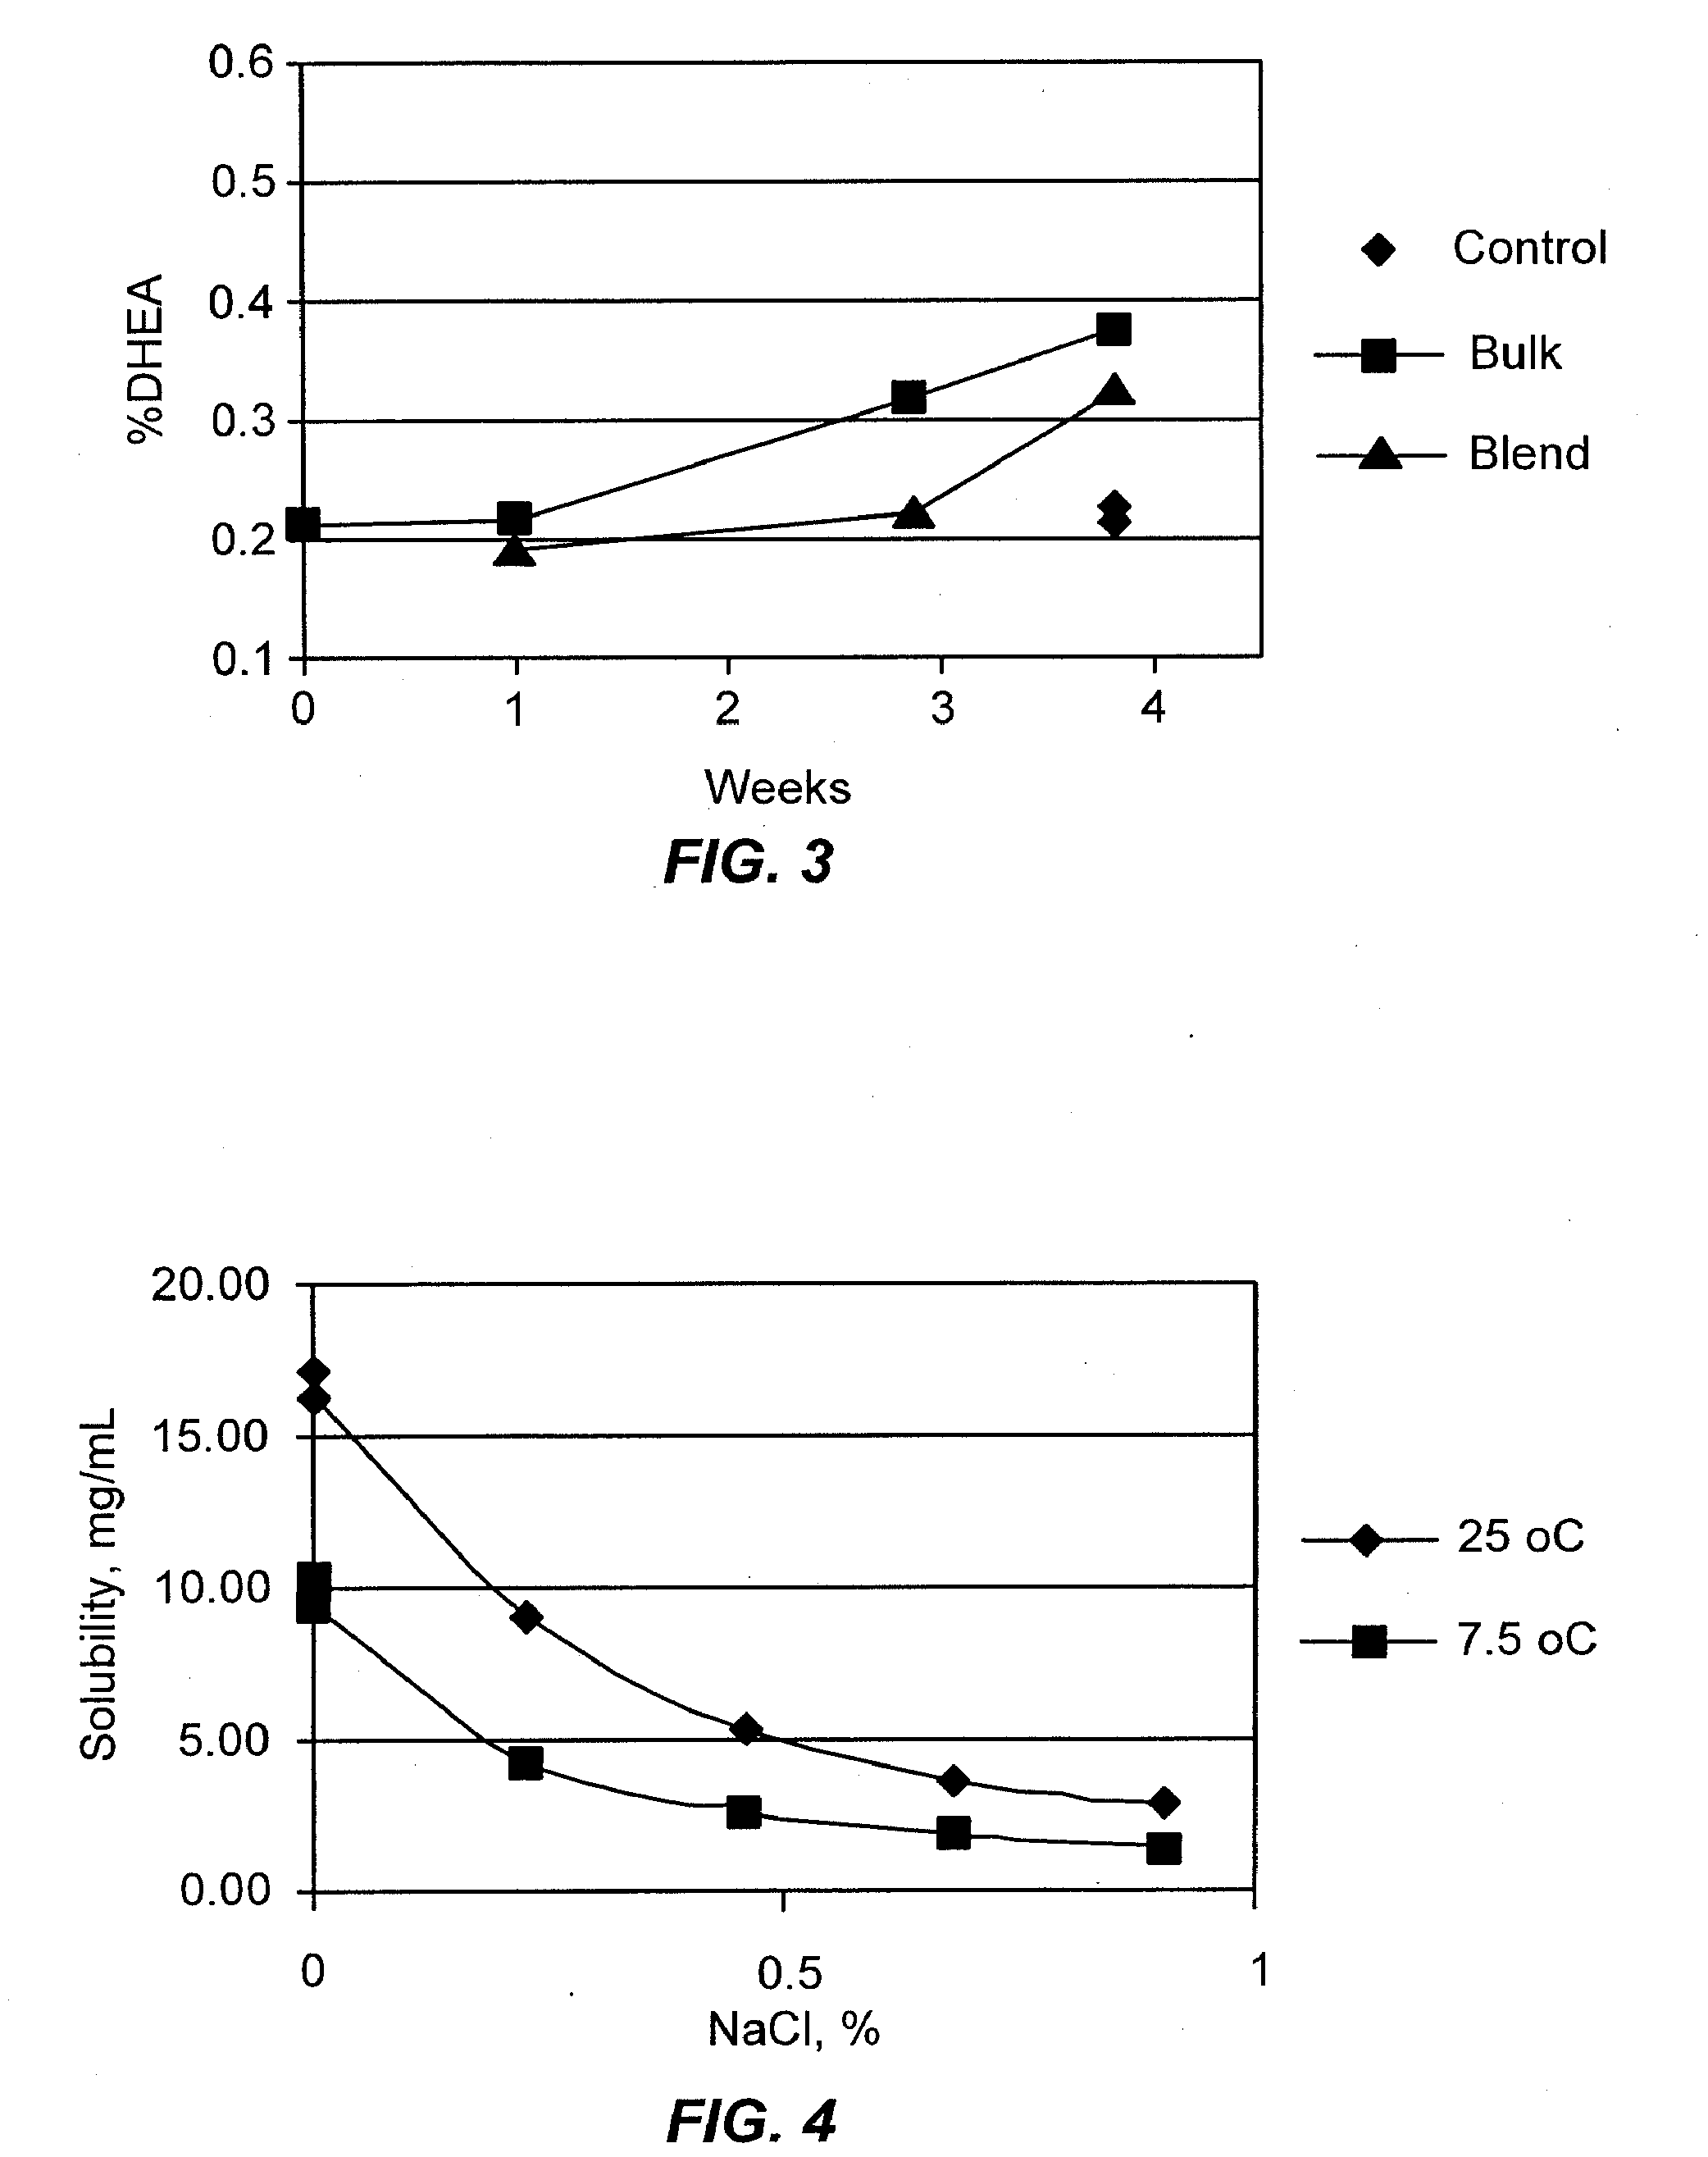 Combination Of Dehydroepiandrosterone Or Dehydroepiandrosterone-Sulfate With An Anticholinergic Bronchodilator For Treatment Of Asthma Or Chronic Obstructive Pulmonary Disease